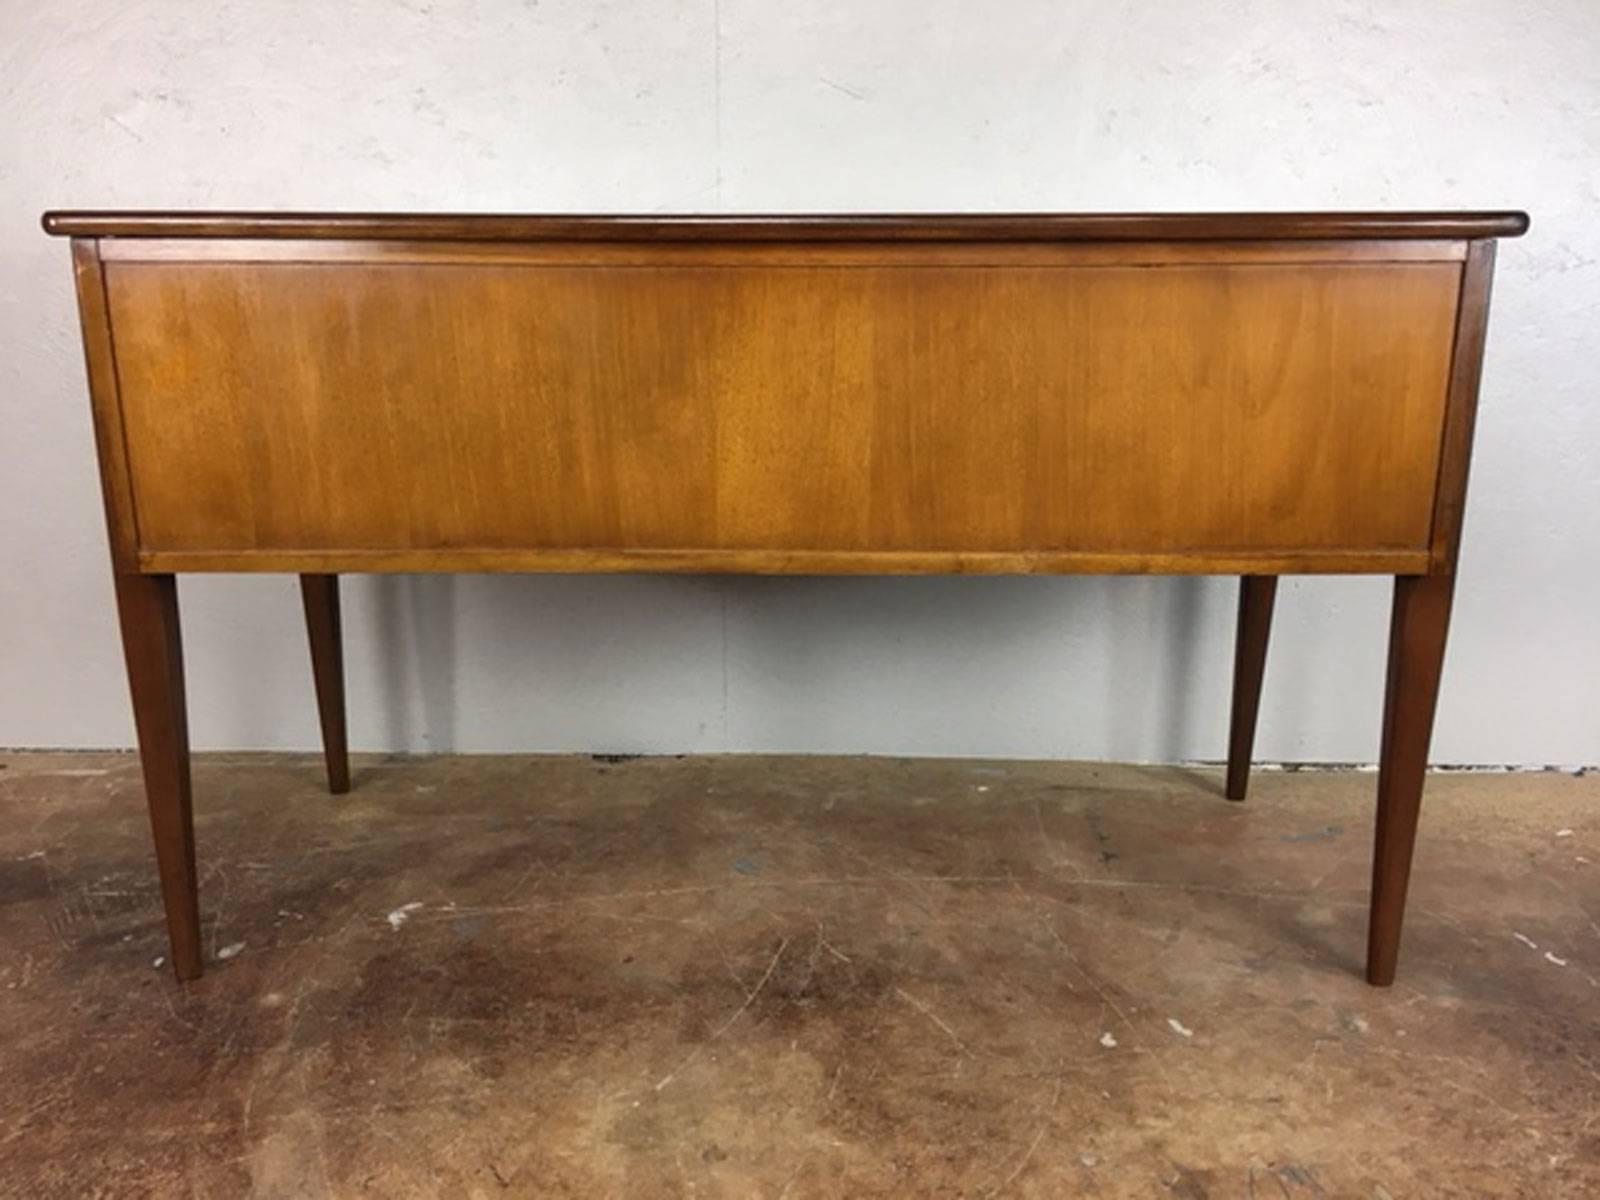 Mid-20th Century External Frame Danish Desk in Pecan and Walnut For Sale